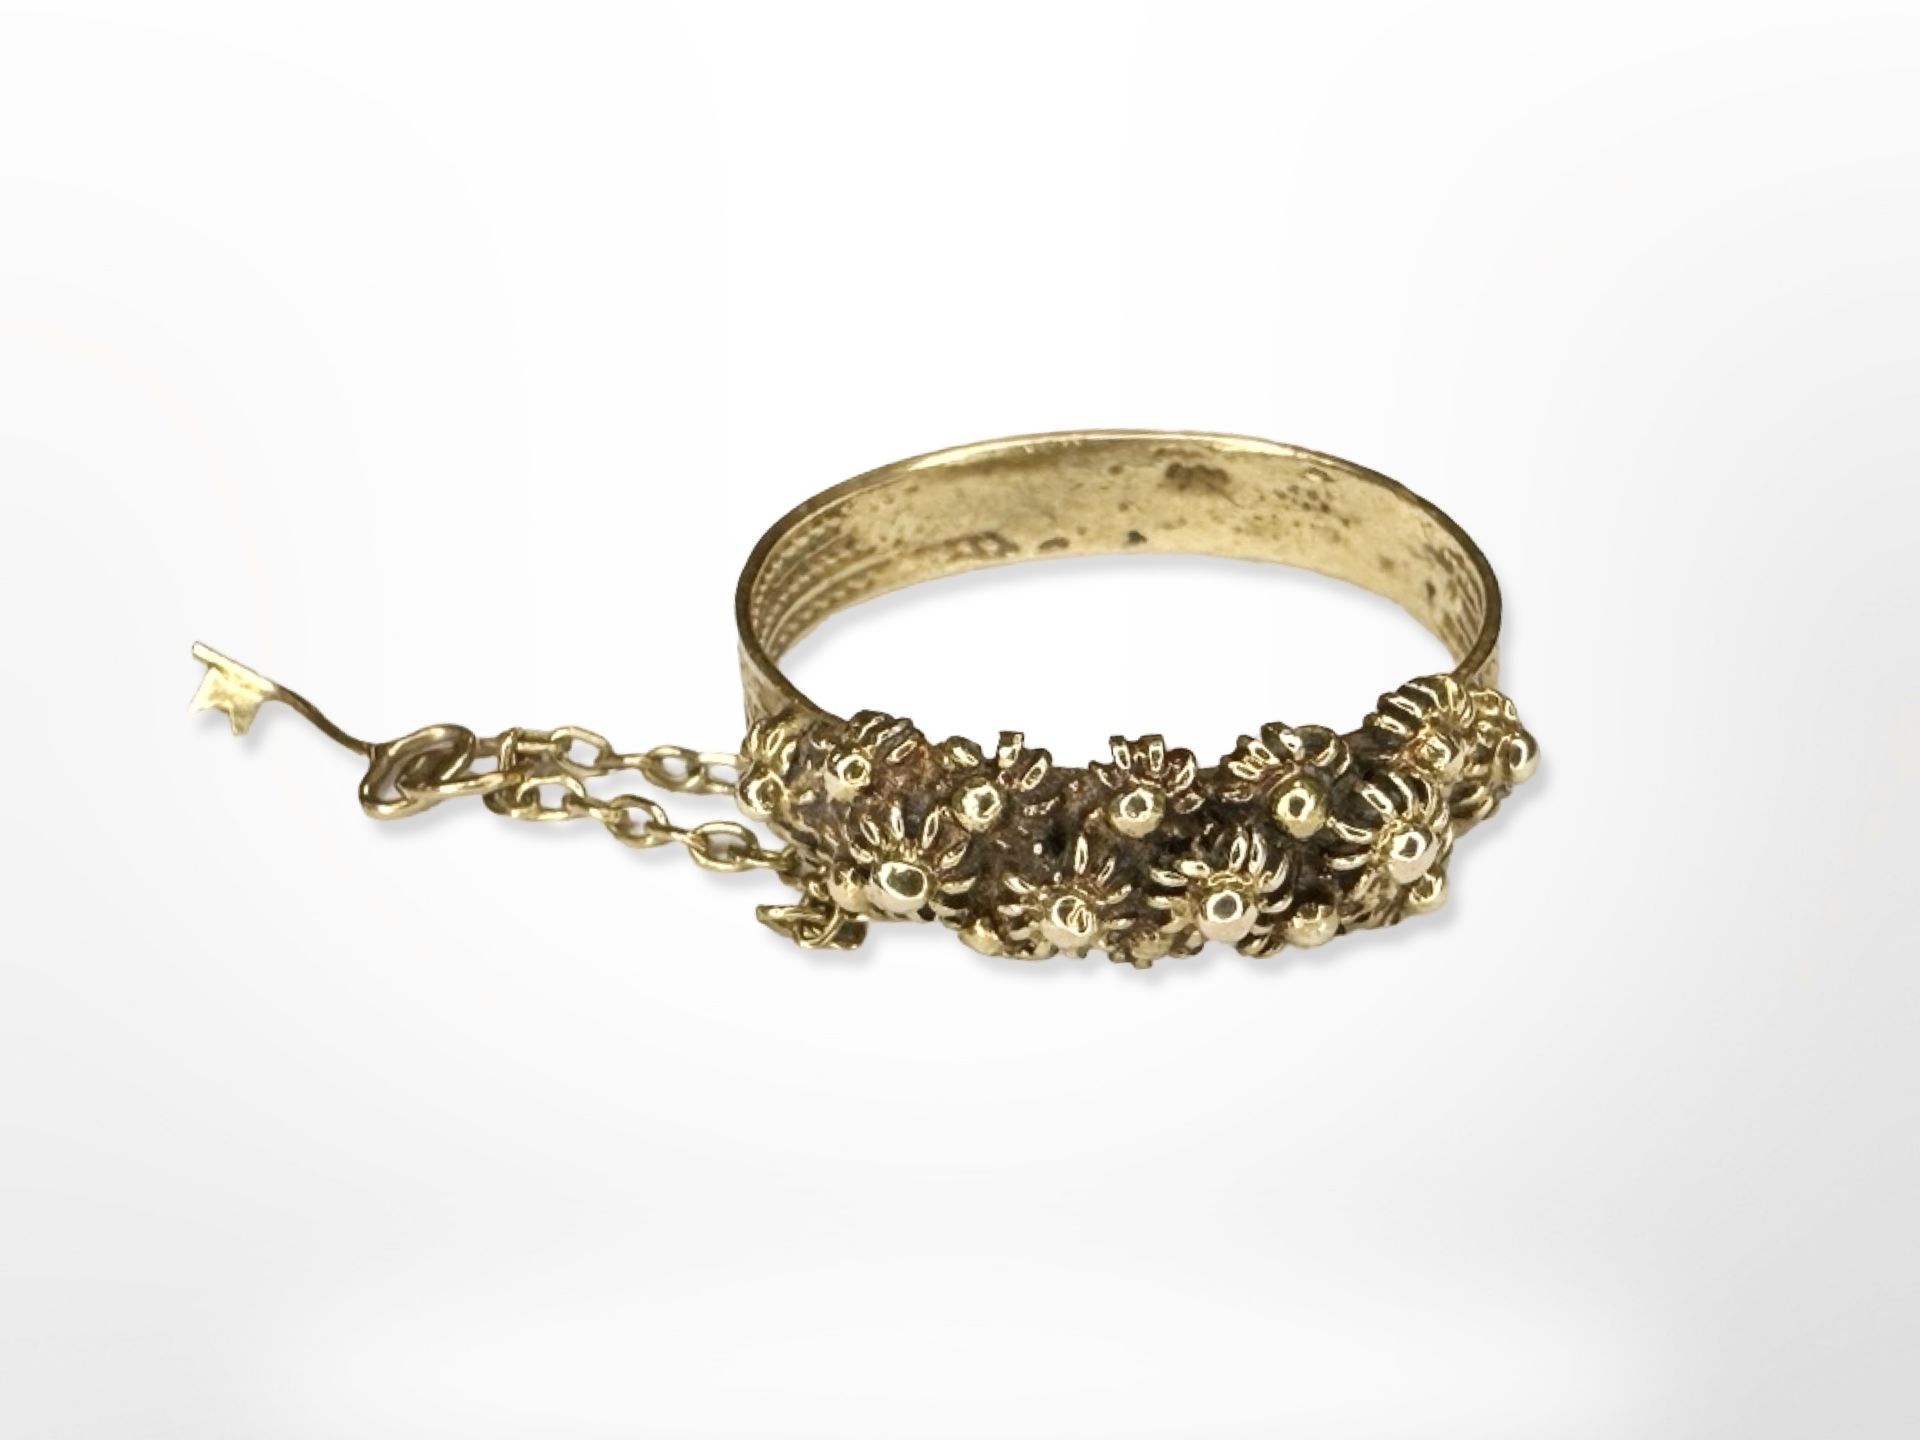 An ornate yellow metal band ring with safety chain and key, size J.